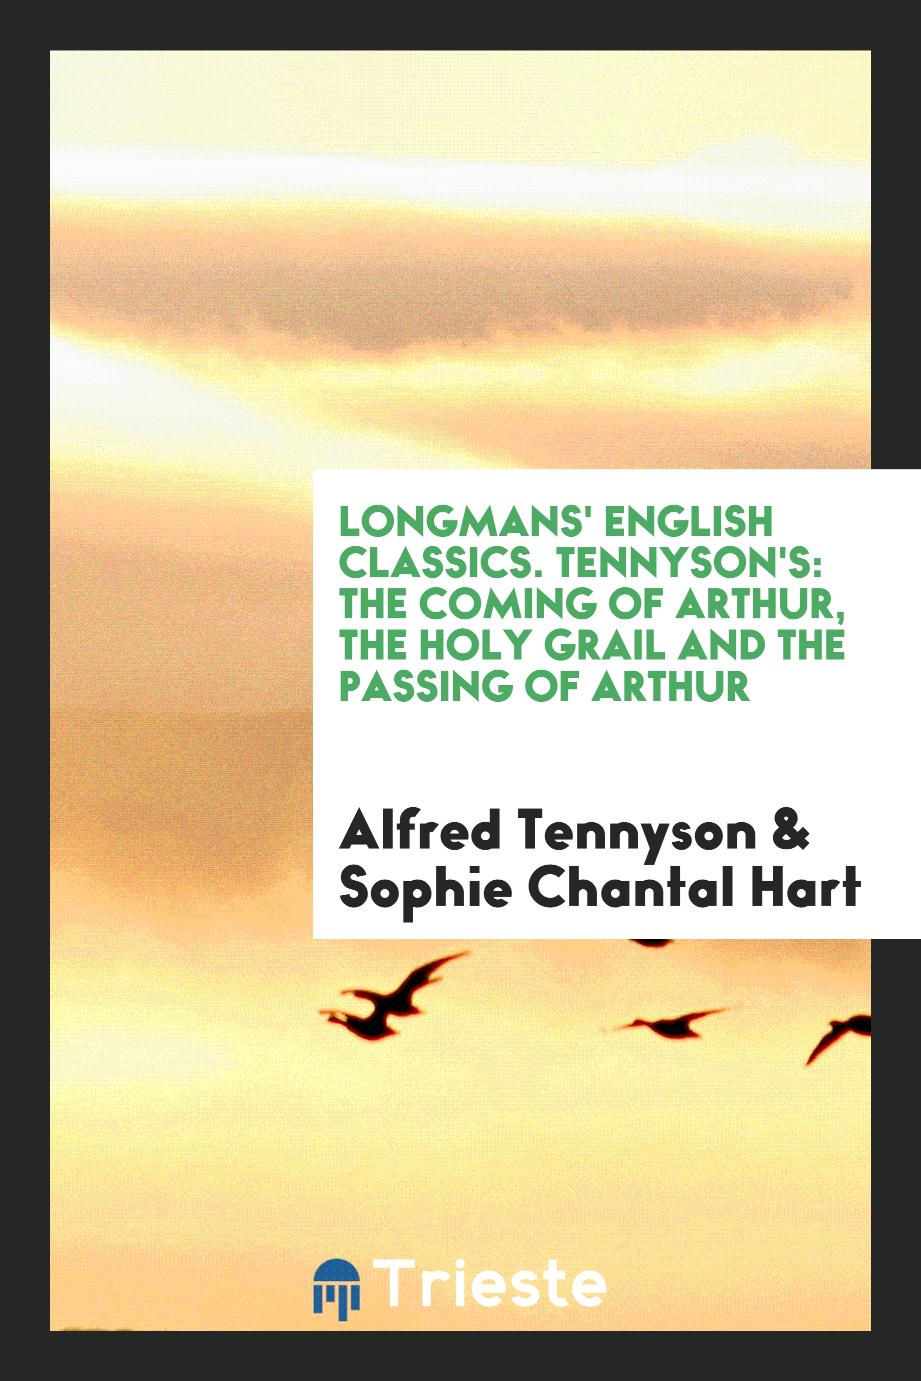 Longmans' English Classics. Tennyson's: The Coming of Arthur, The Holy Grail and The Passing of Arthur